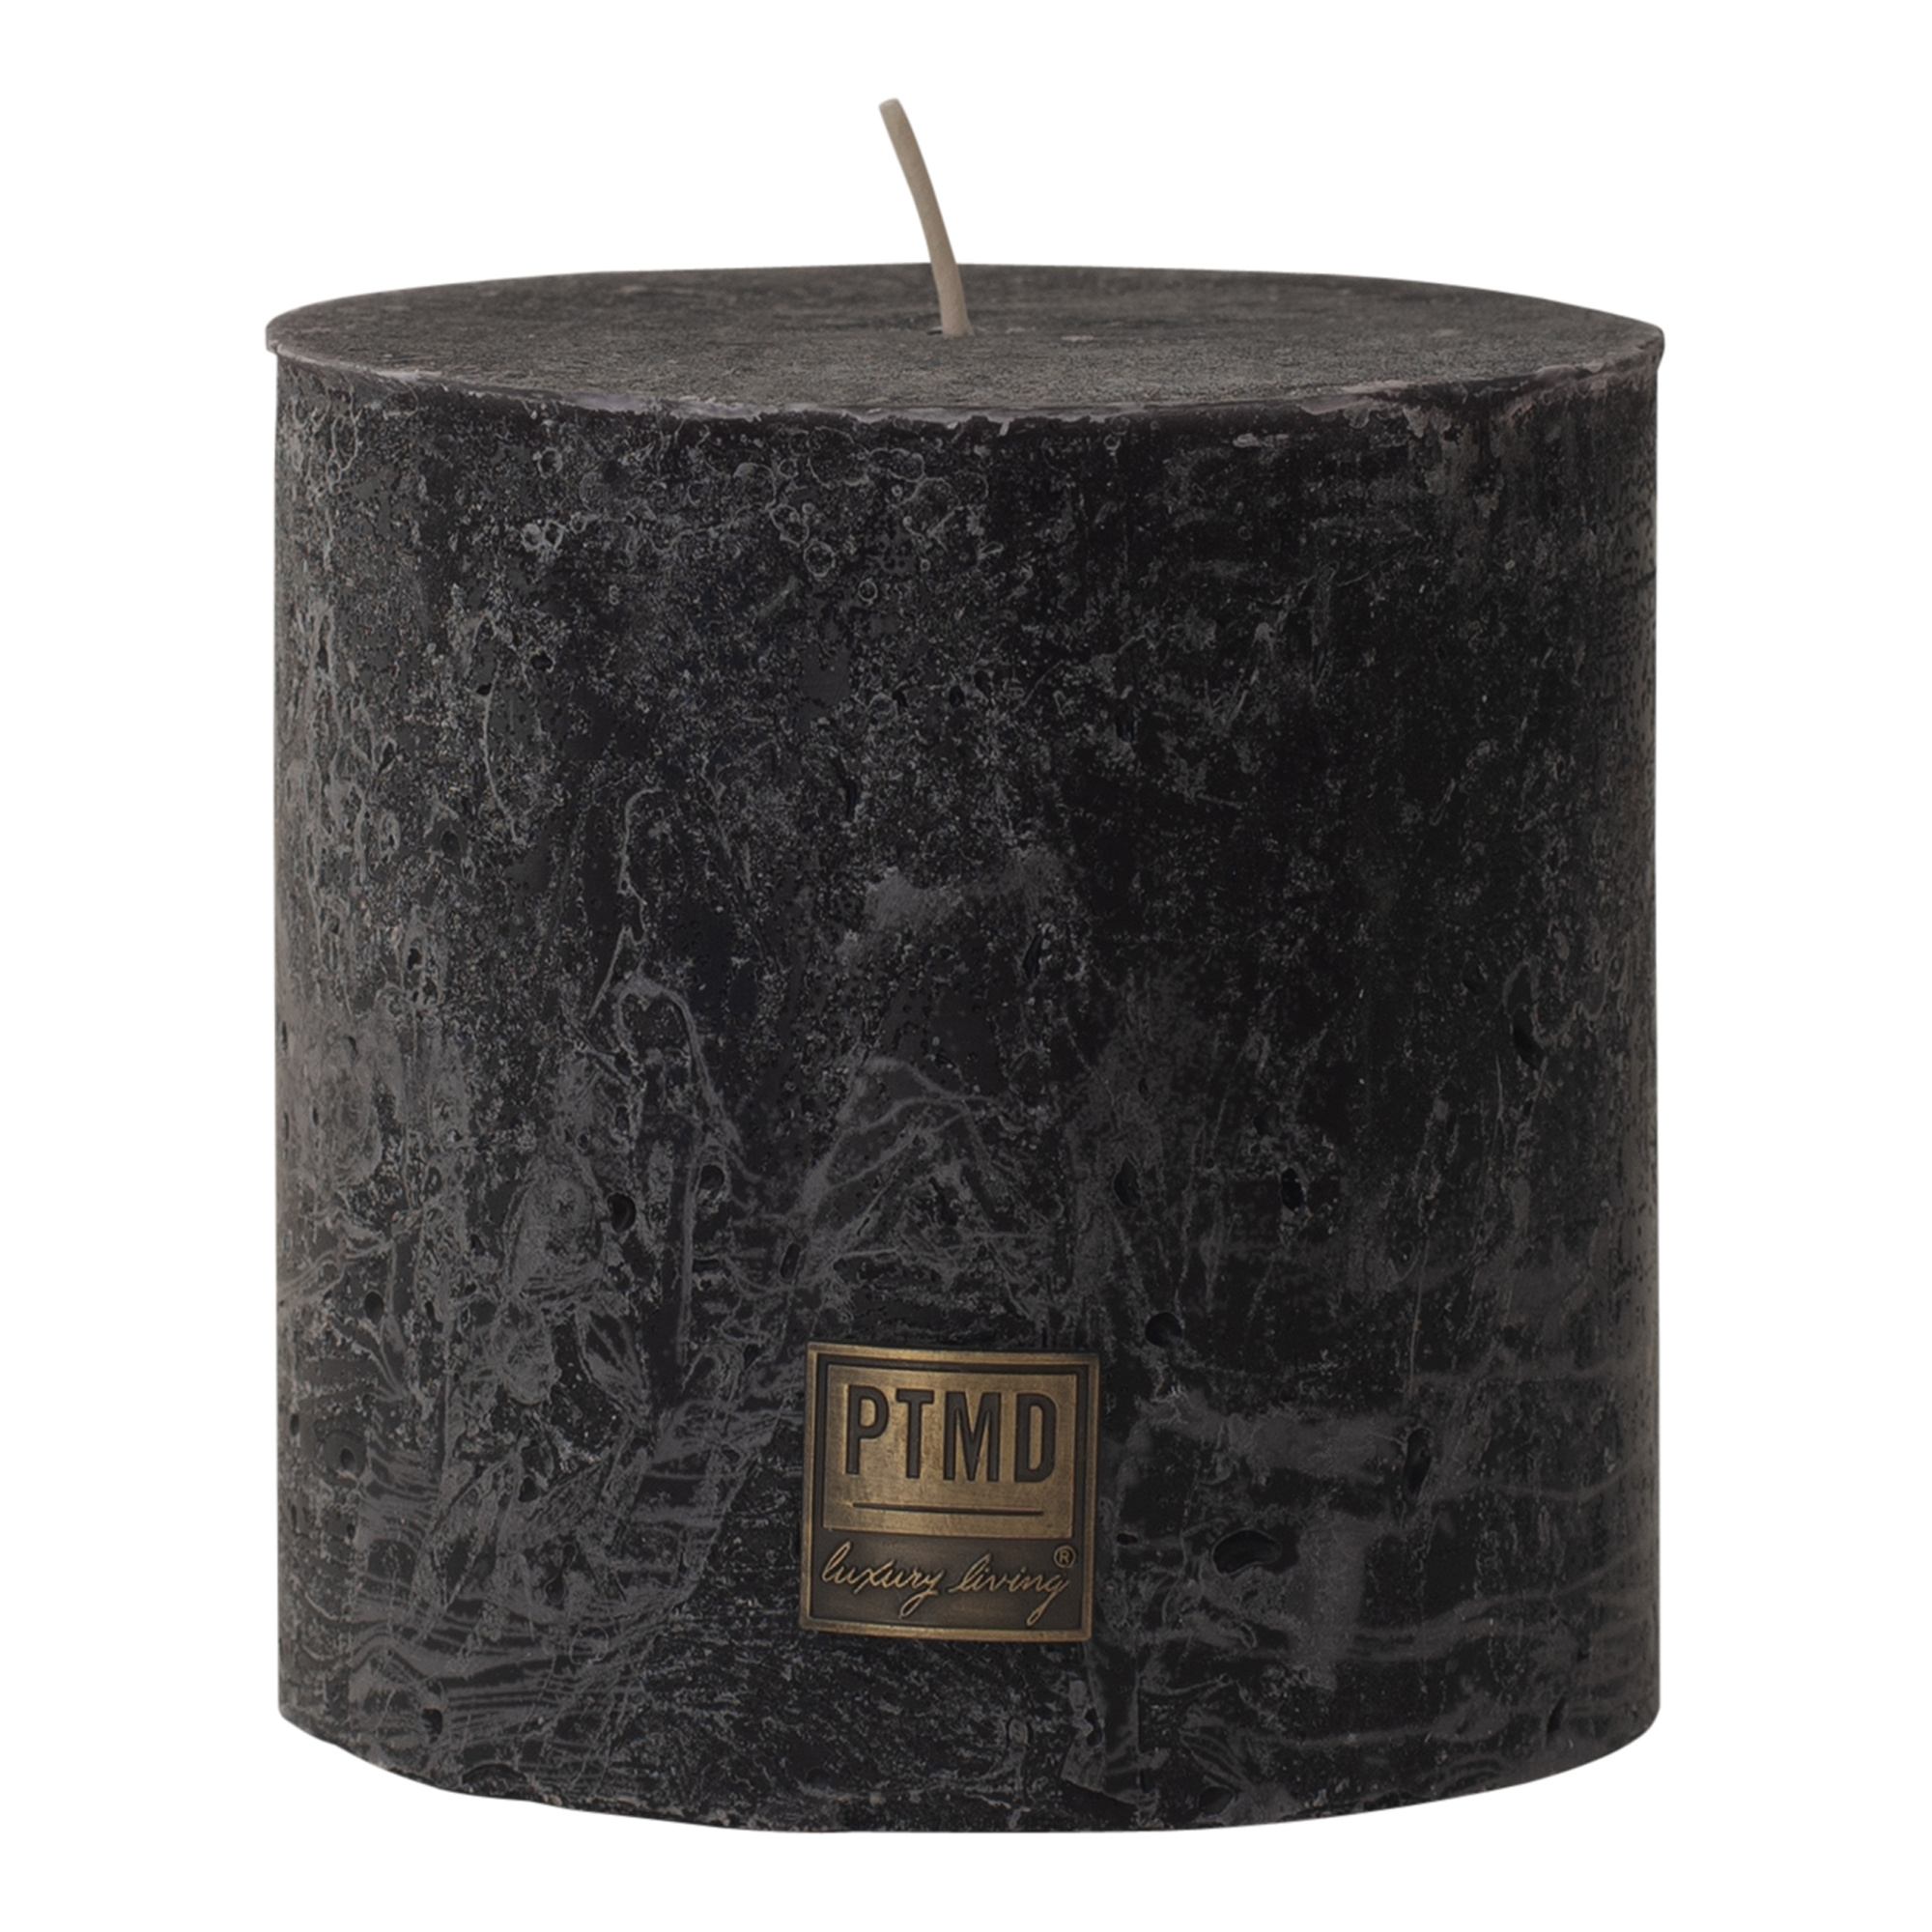 ptmd-10-x-10cm-rustic-charcoal-black-block-candle